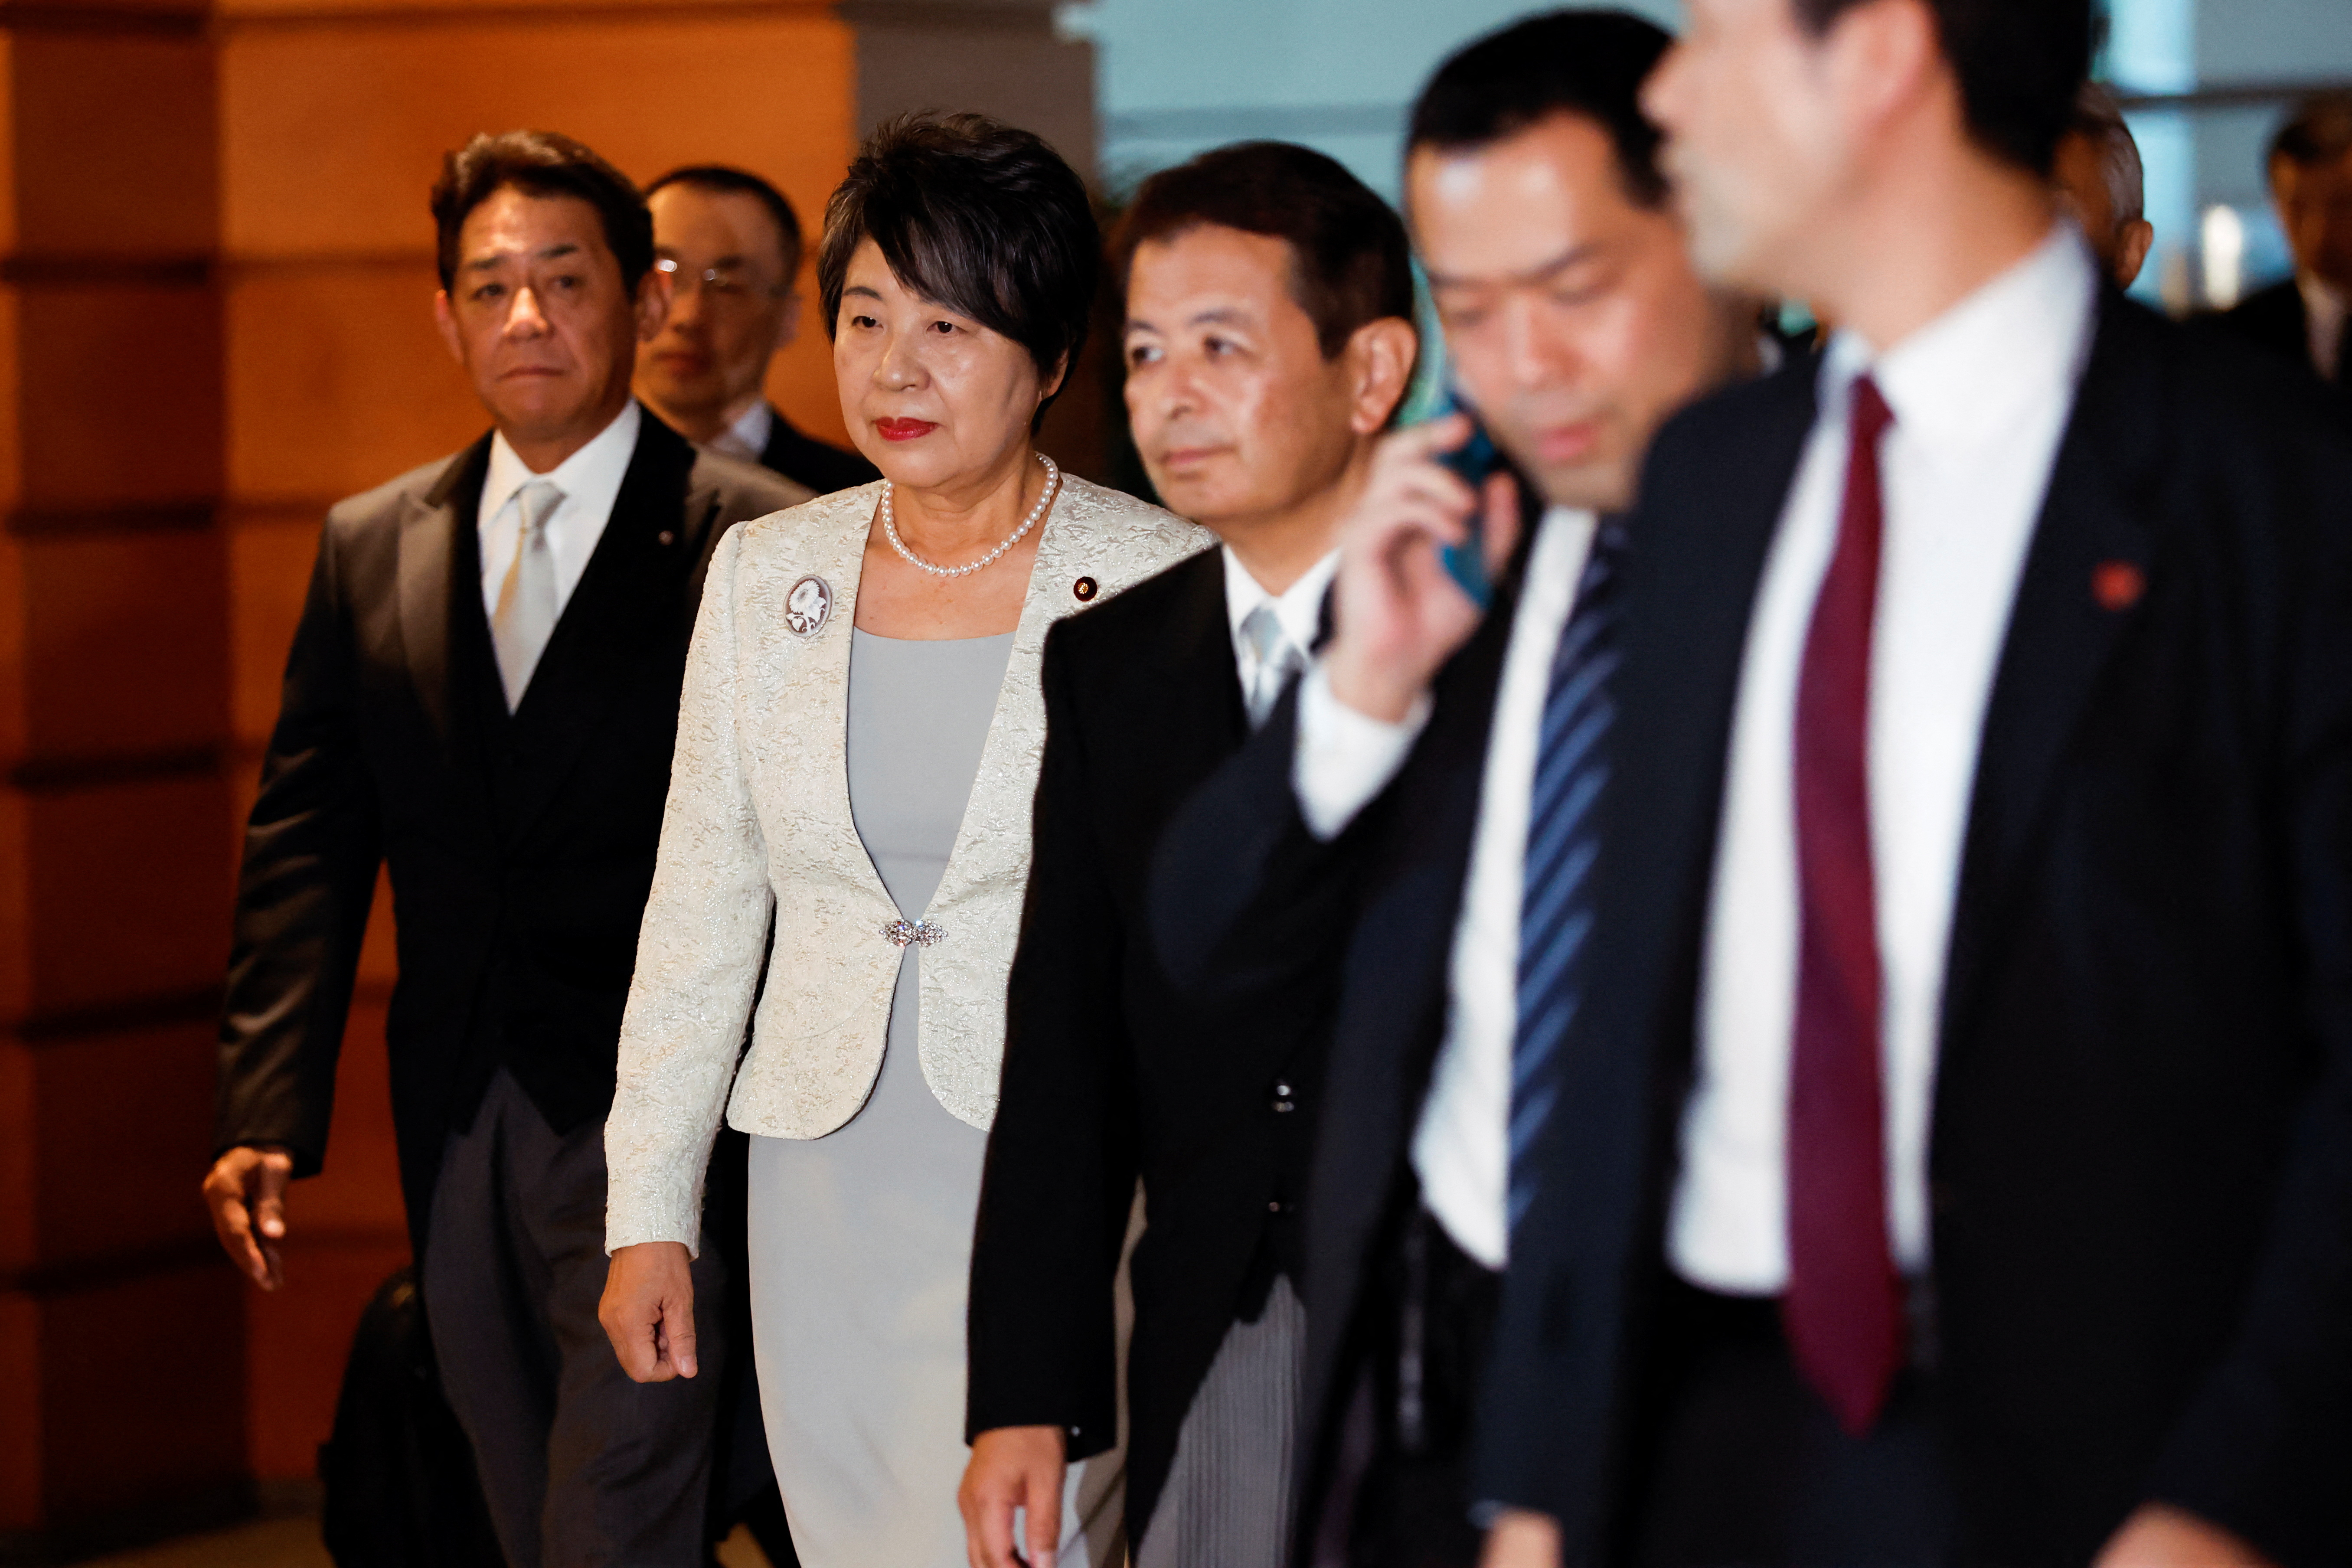 Japan has five women in new government line-up but still misses G7 average Reuters picture pic